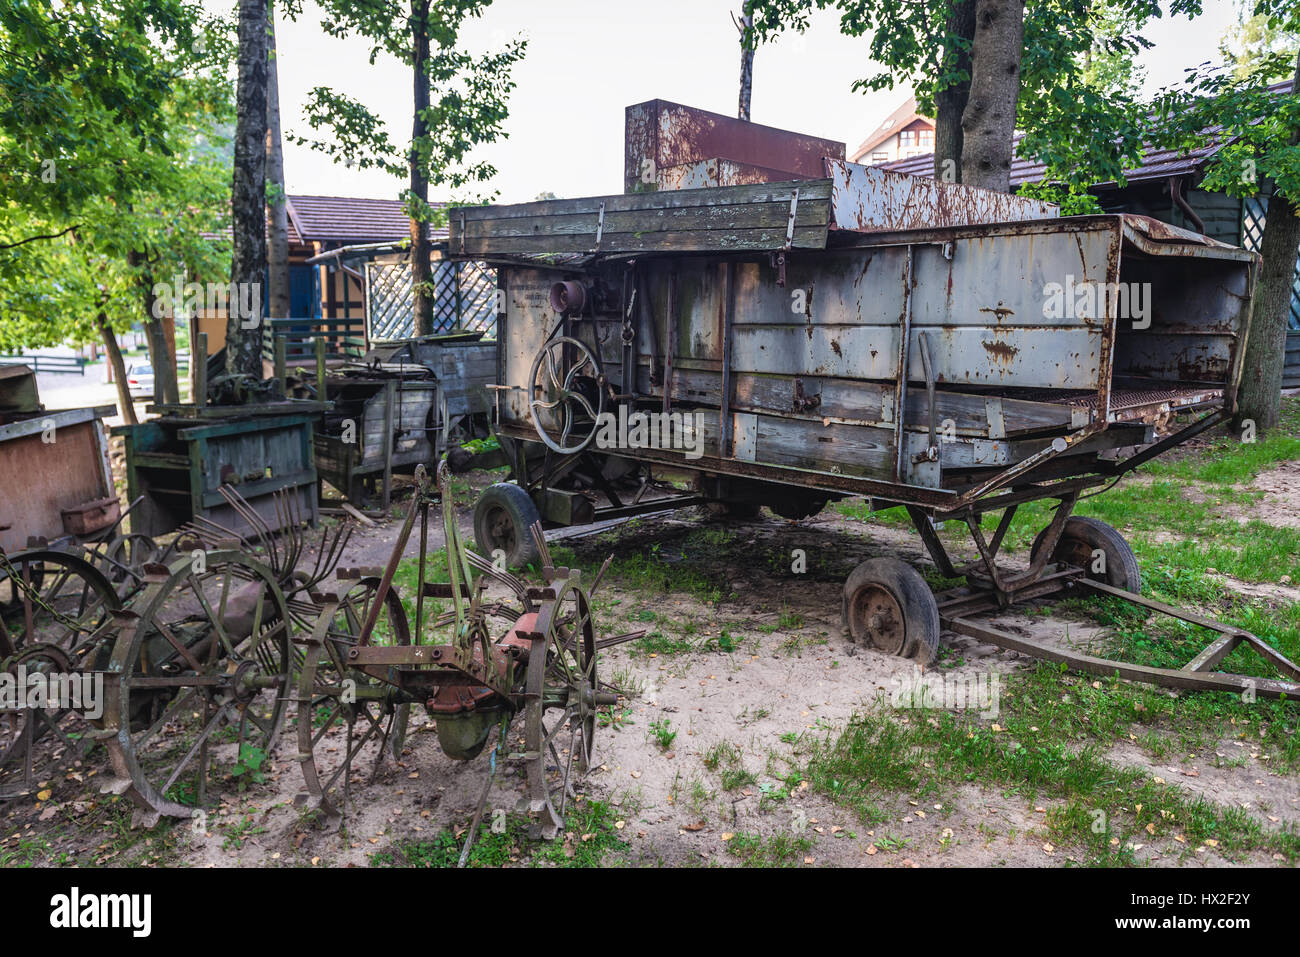 Old farming machine in Centre for Education and Regional Promotion in Szymbark village, Kashubia region of Pomeranian Voivodeship in Poland Stock Photo